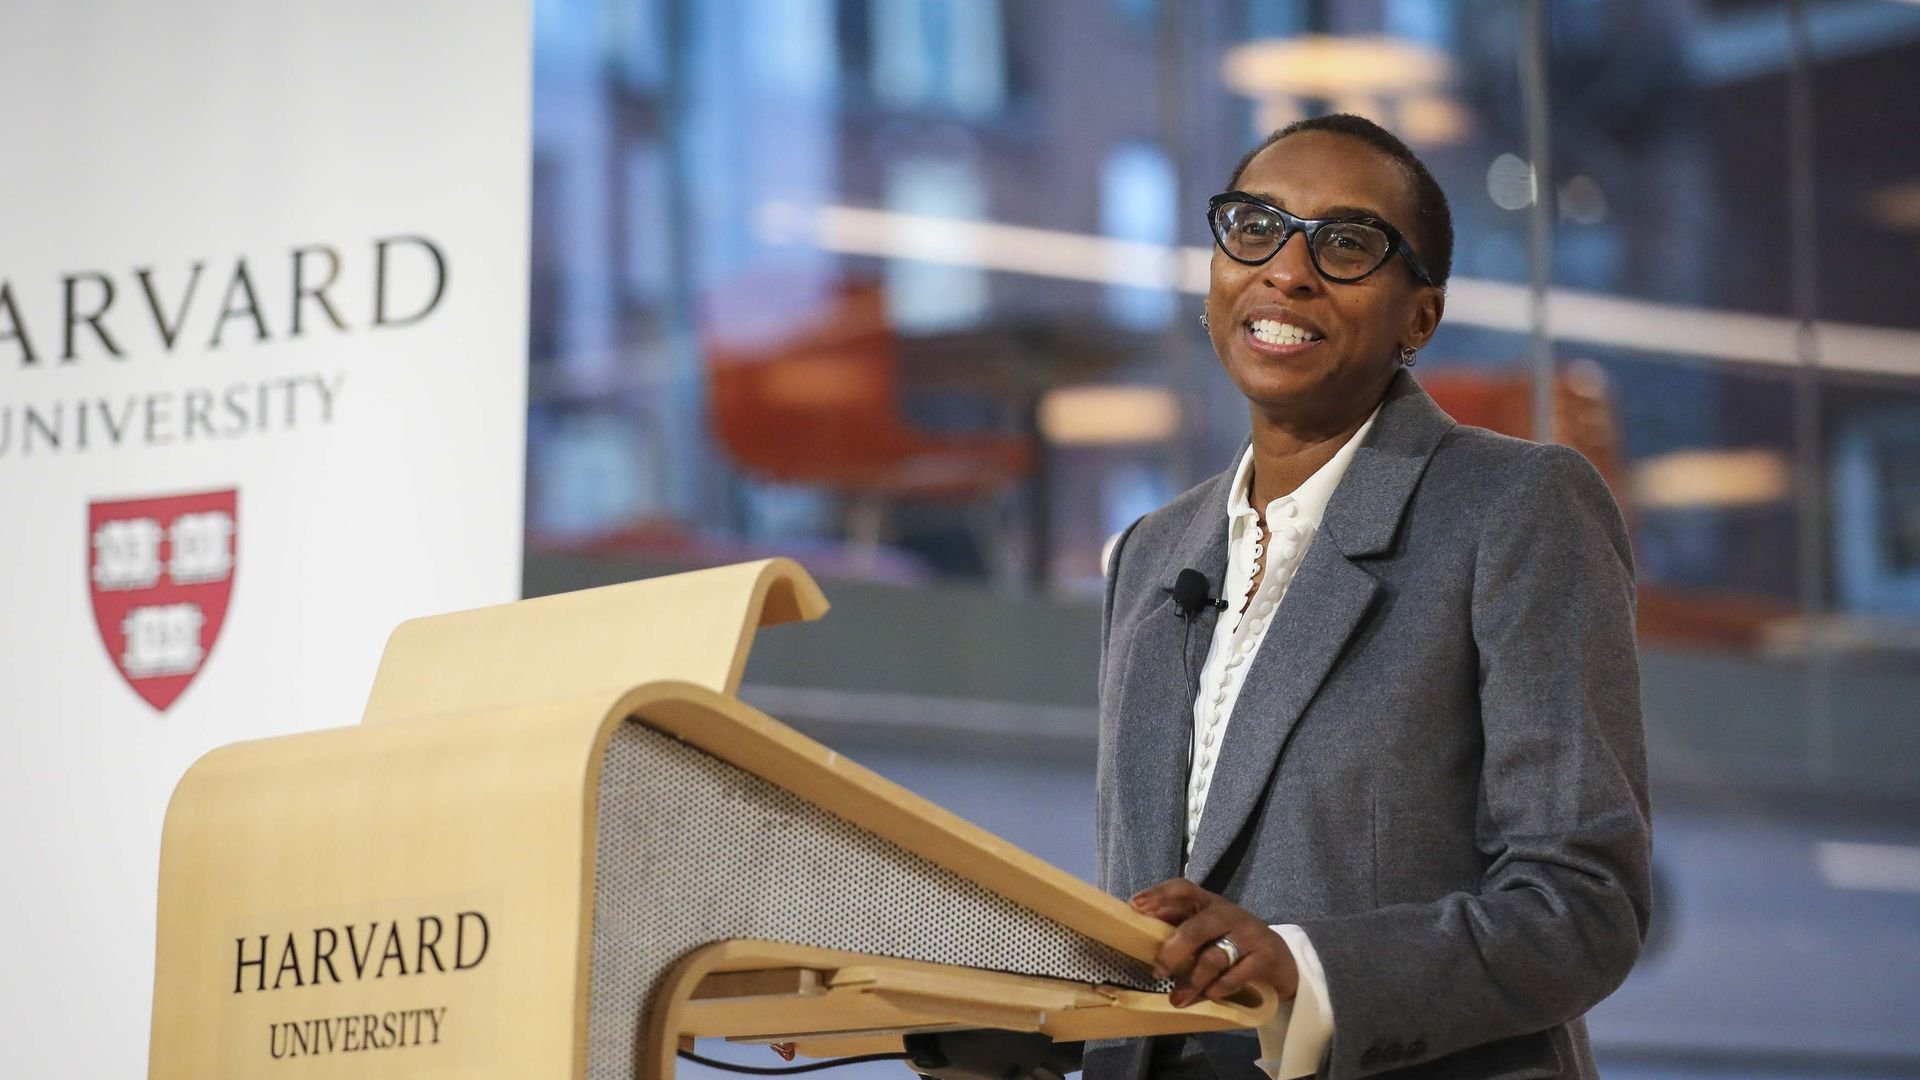 Claudine Gay to lead Harvard as its first Black president